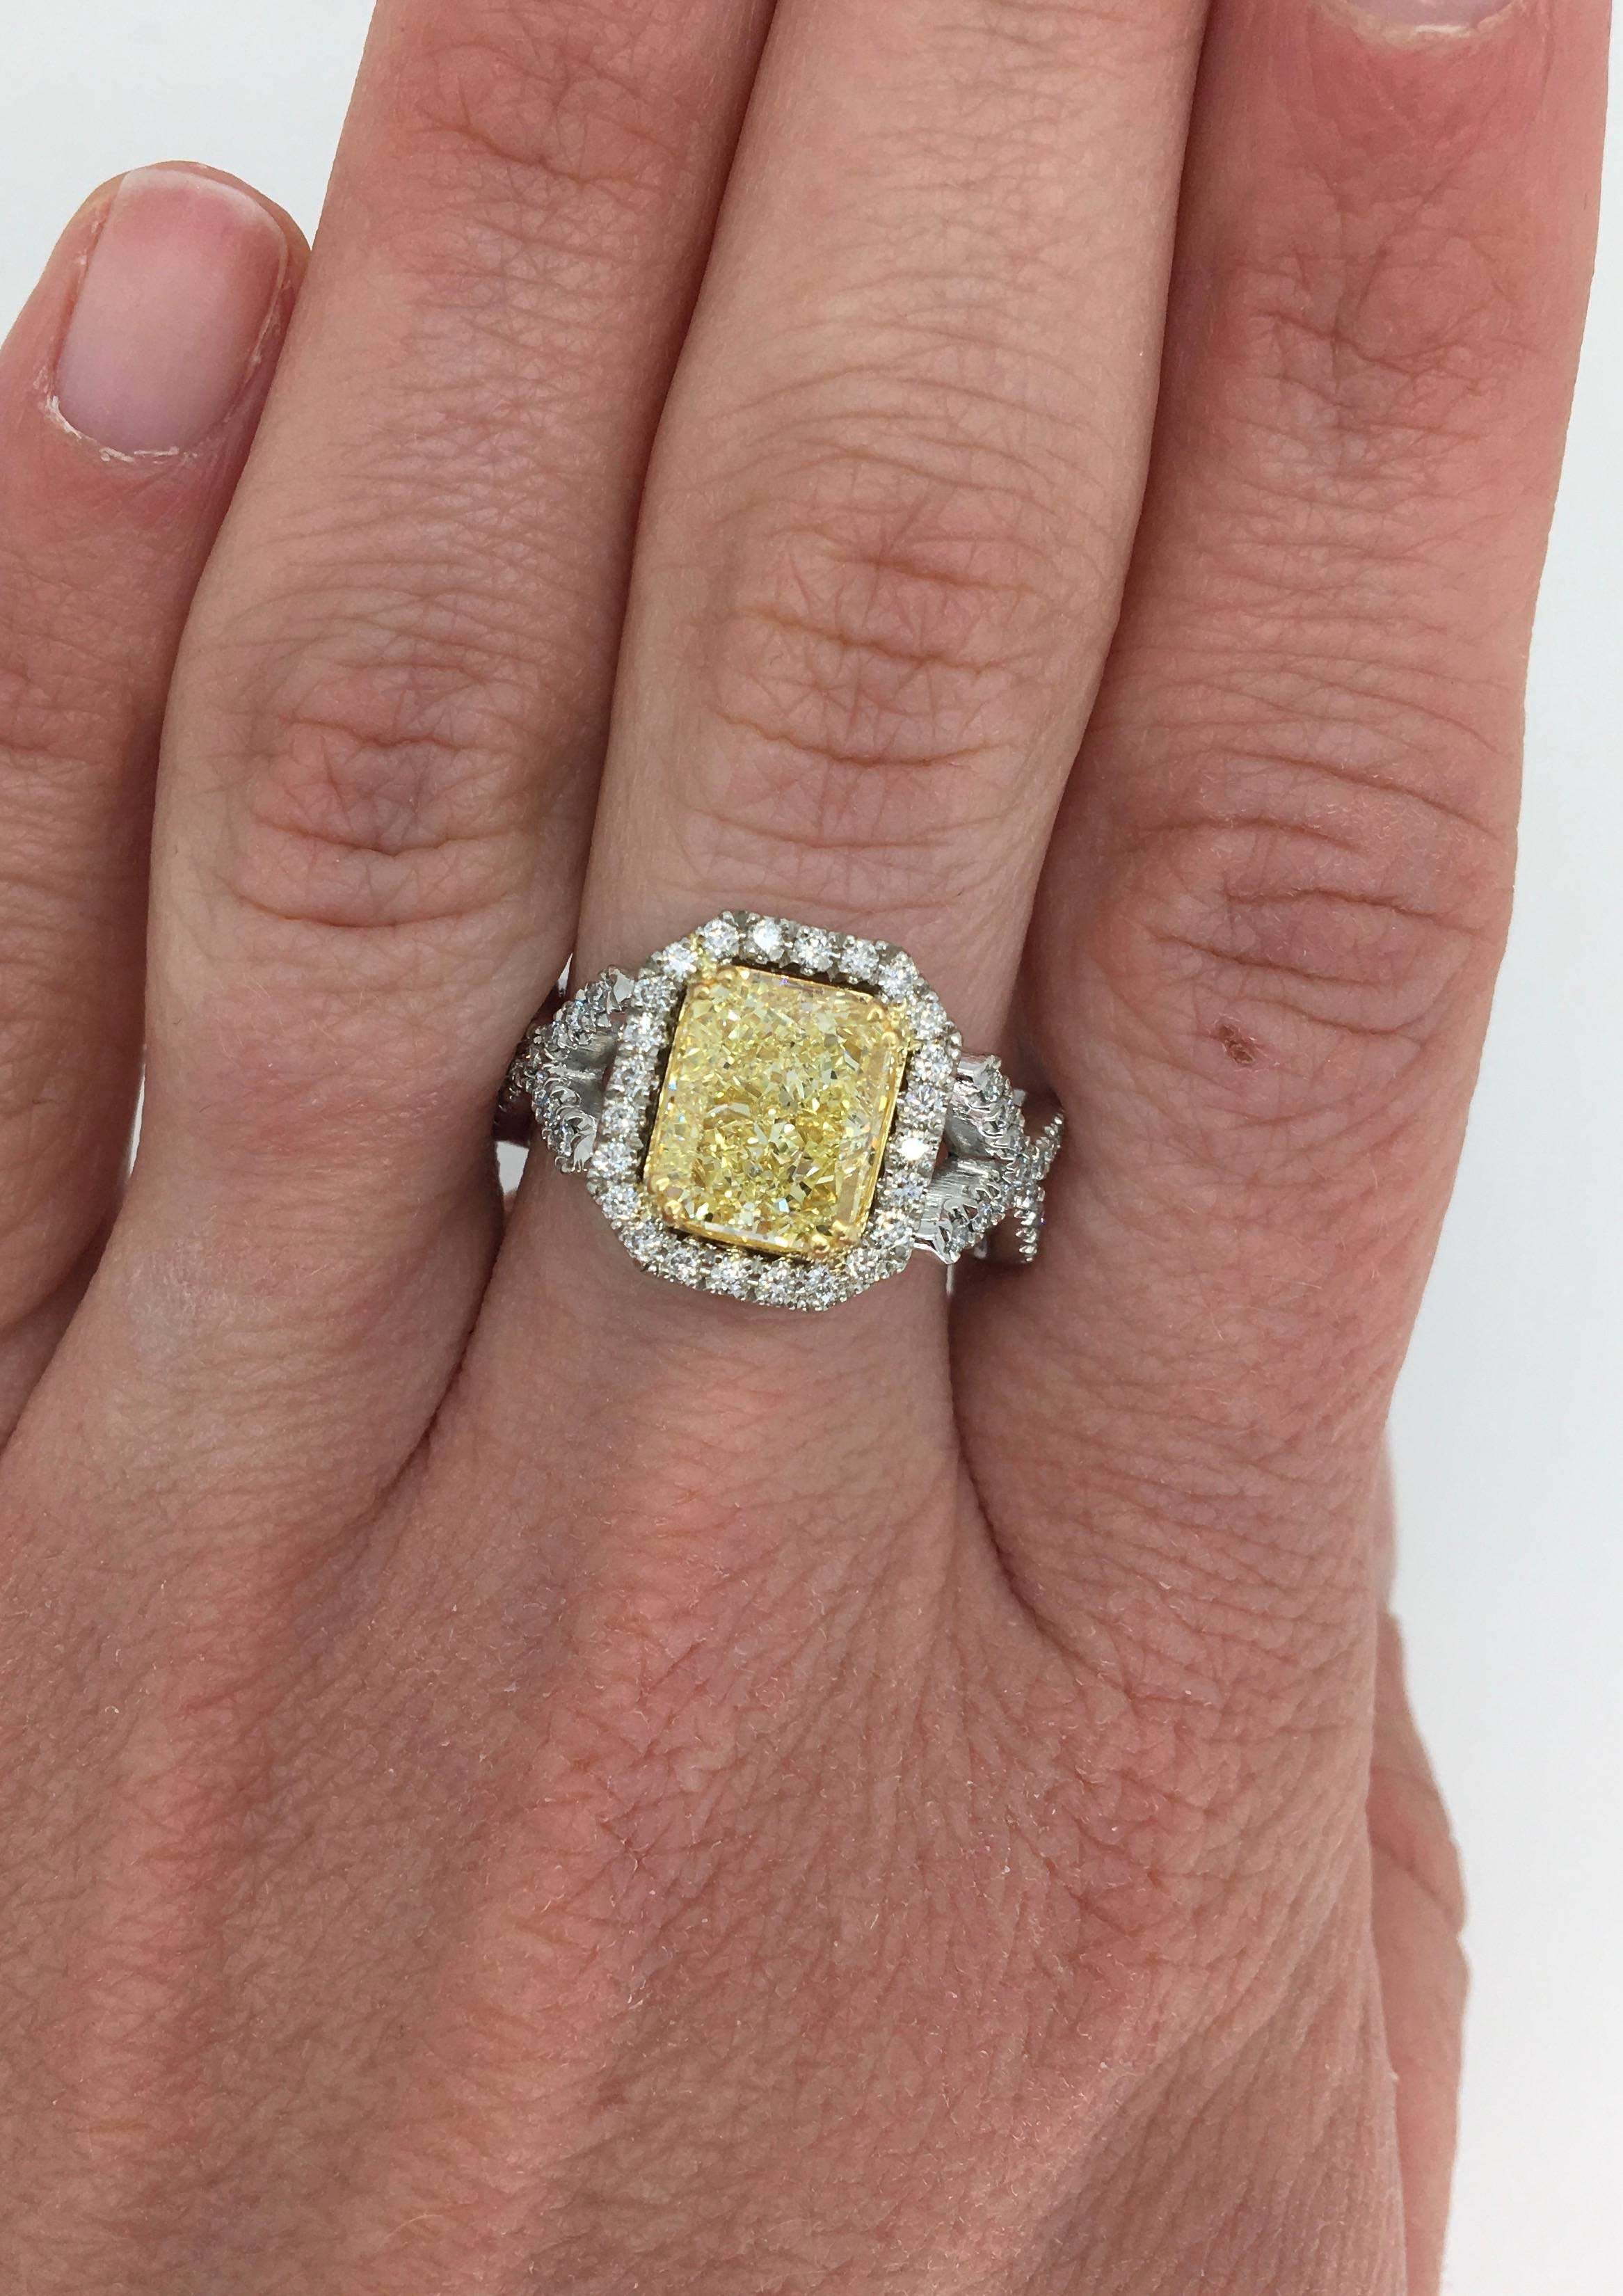 One-of-a-kind Savransky Yellow & White diamond ring. This ring features a gorgeous GIA Certified 3.38CT Cut Cornered Rectangular Cut Fancy Light Yellow Diamond in the center. The featured Diamond displays VS1 clarity.  The ring is adorned with 148